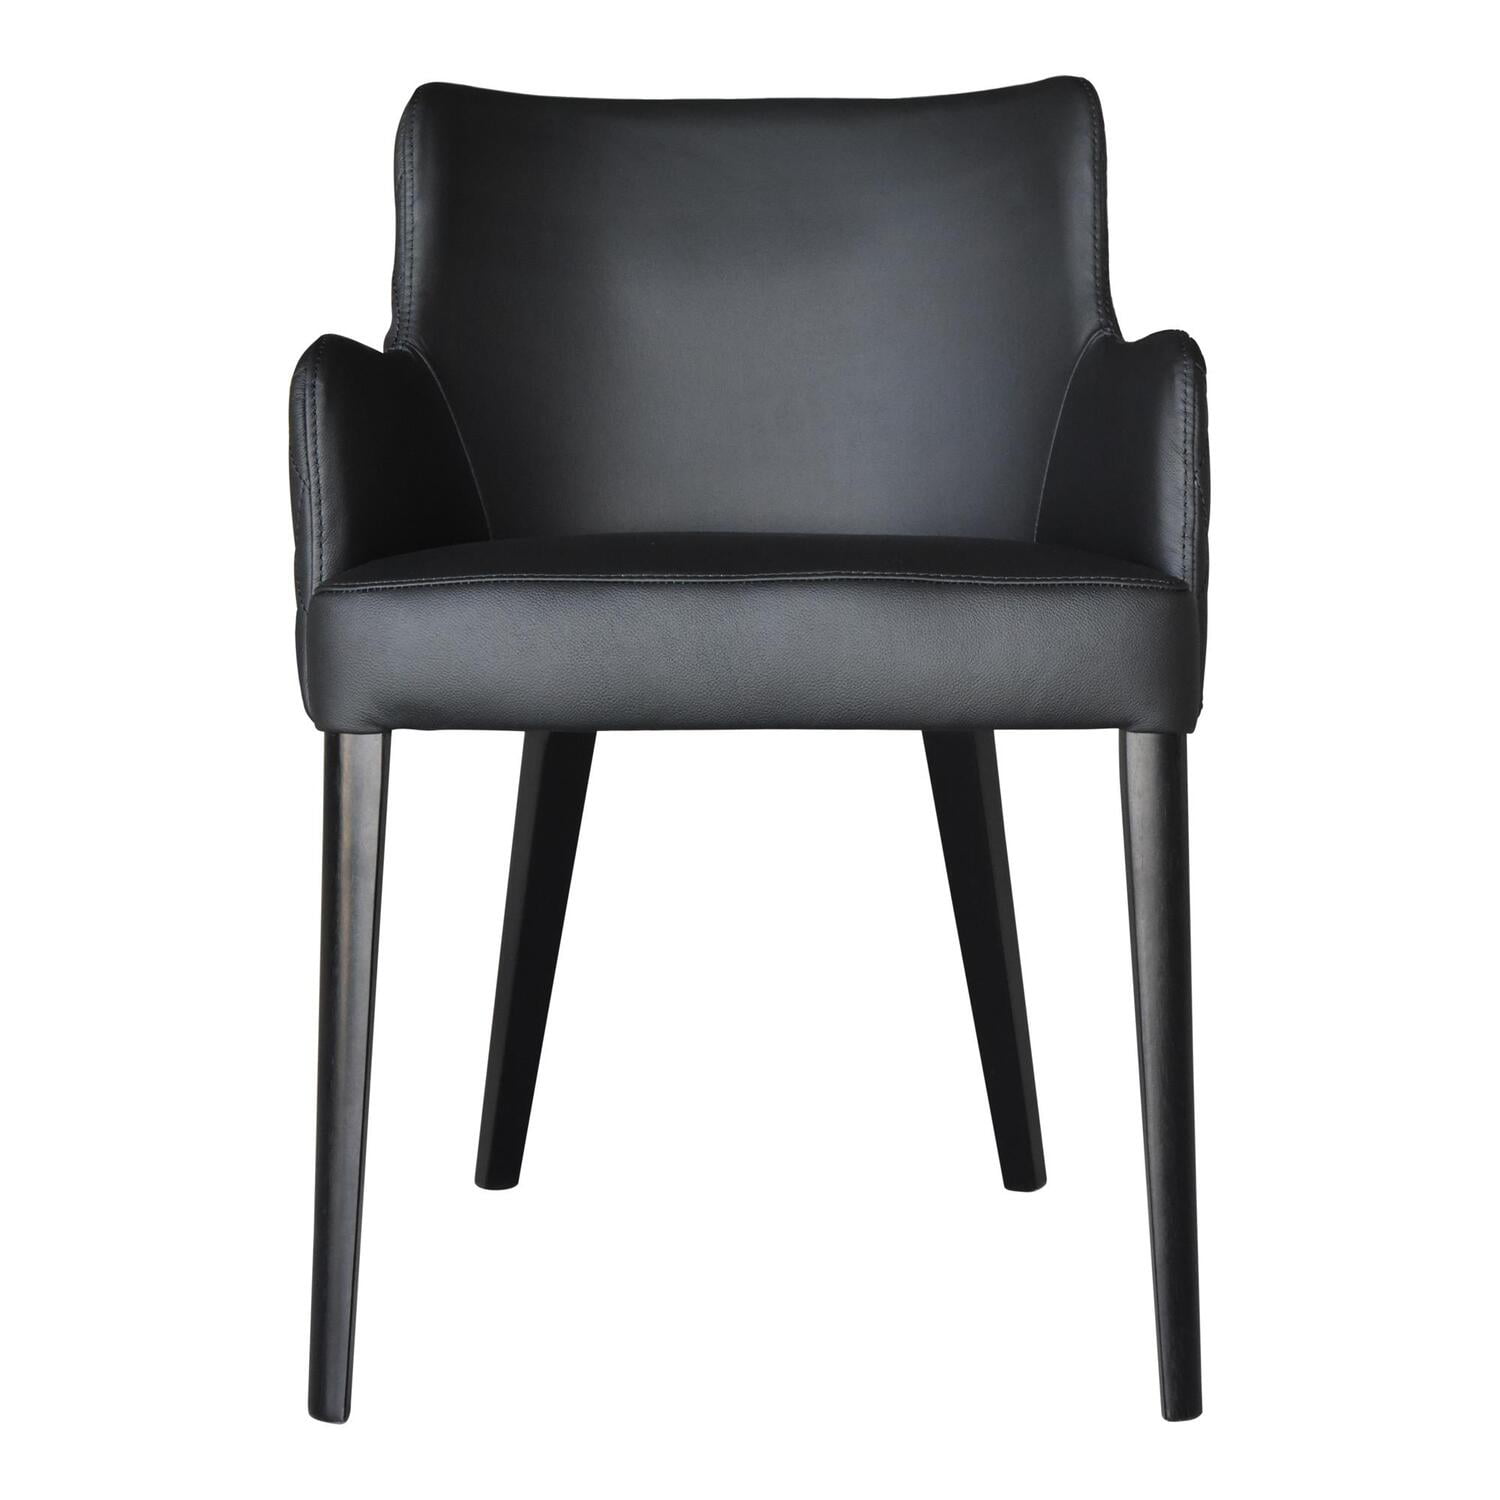 Moe's Home Collection Zayden Dining Chair Black